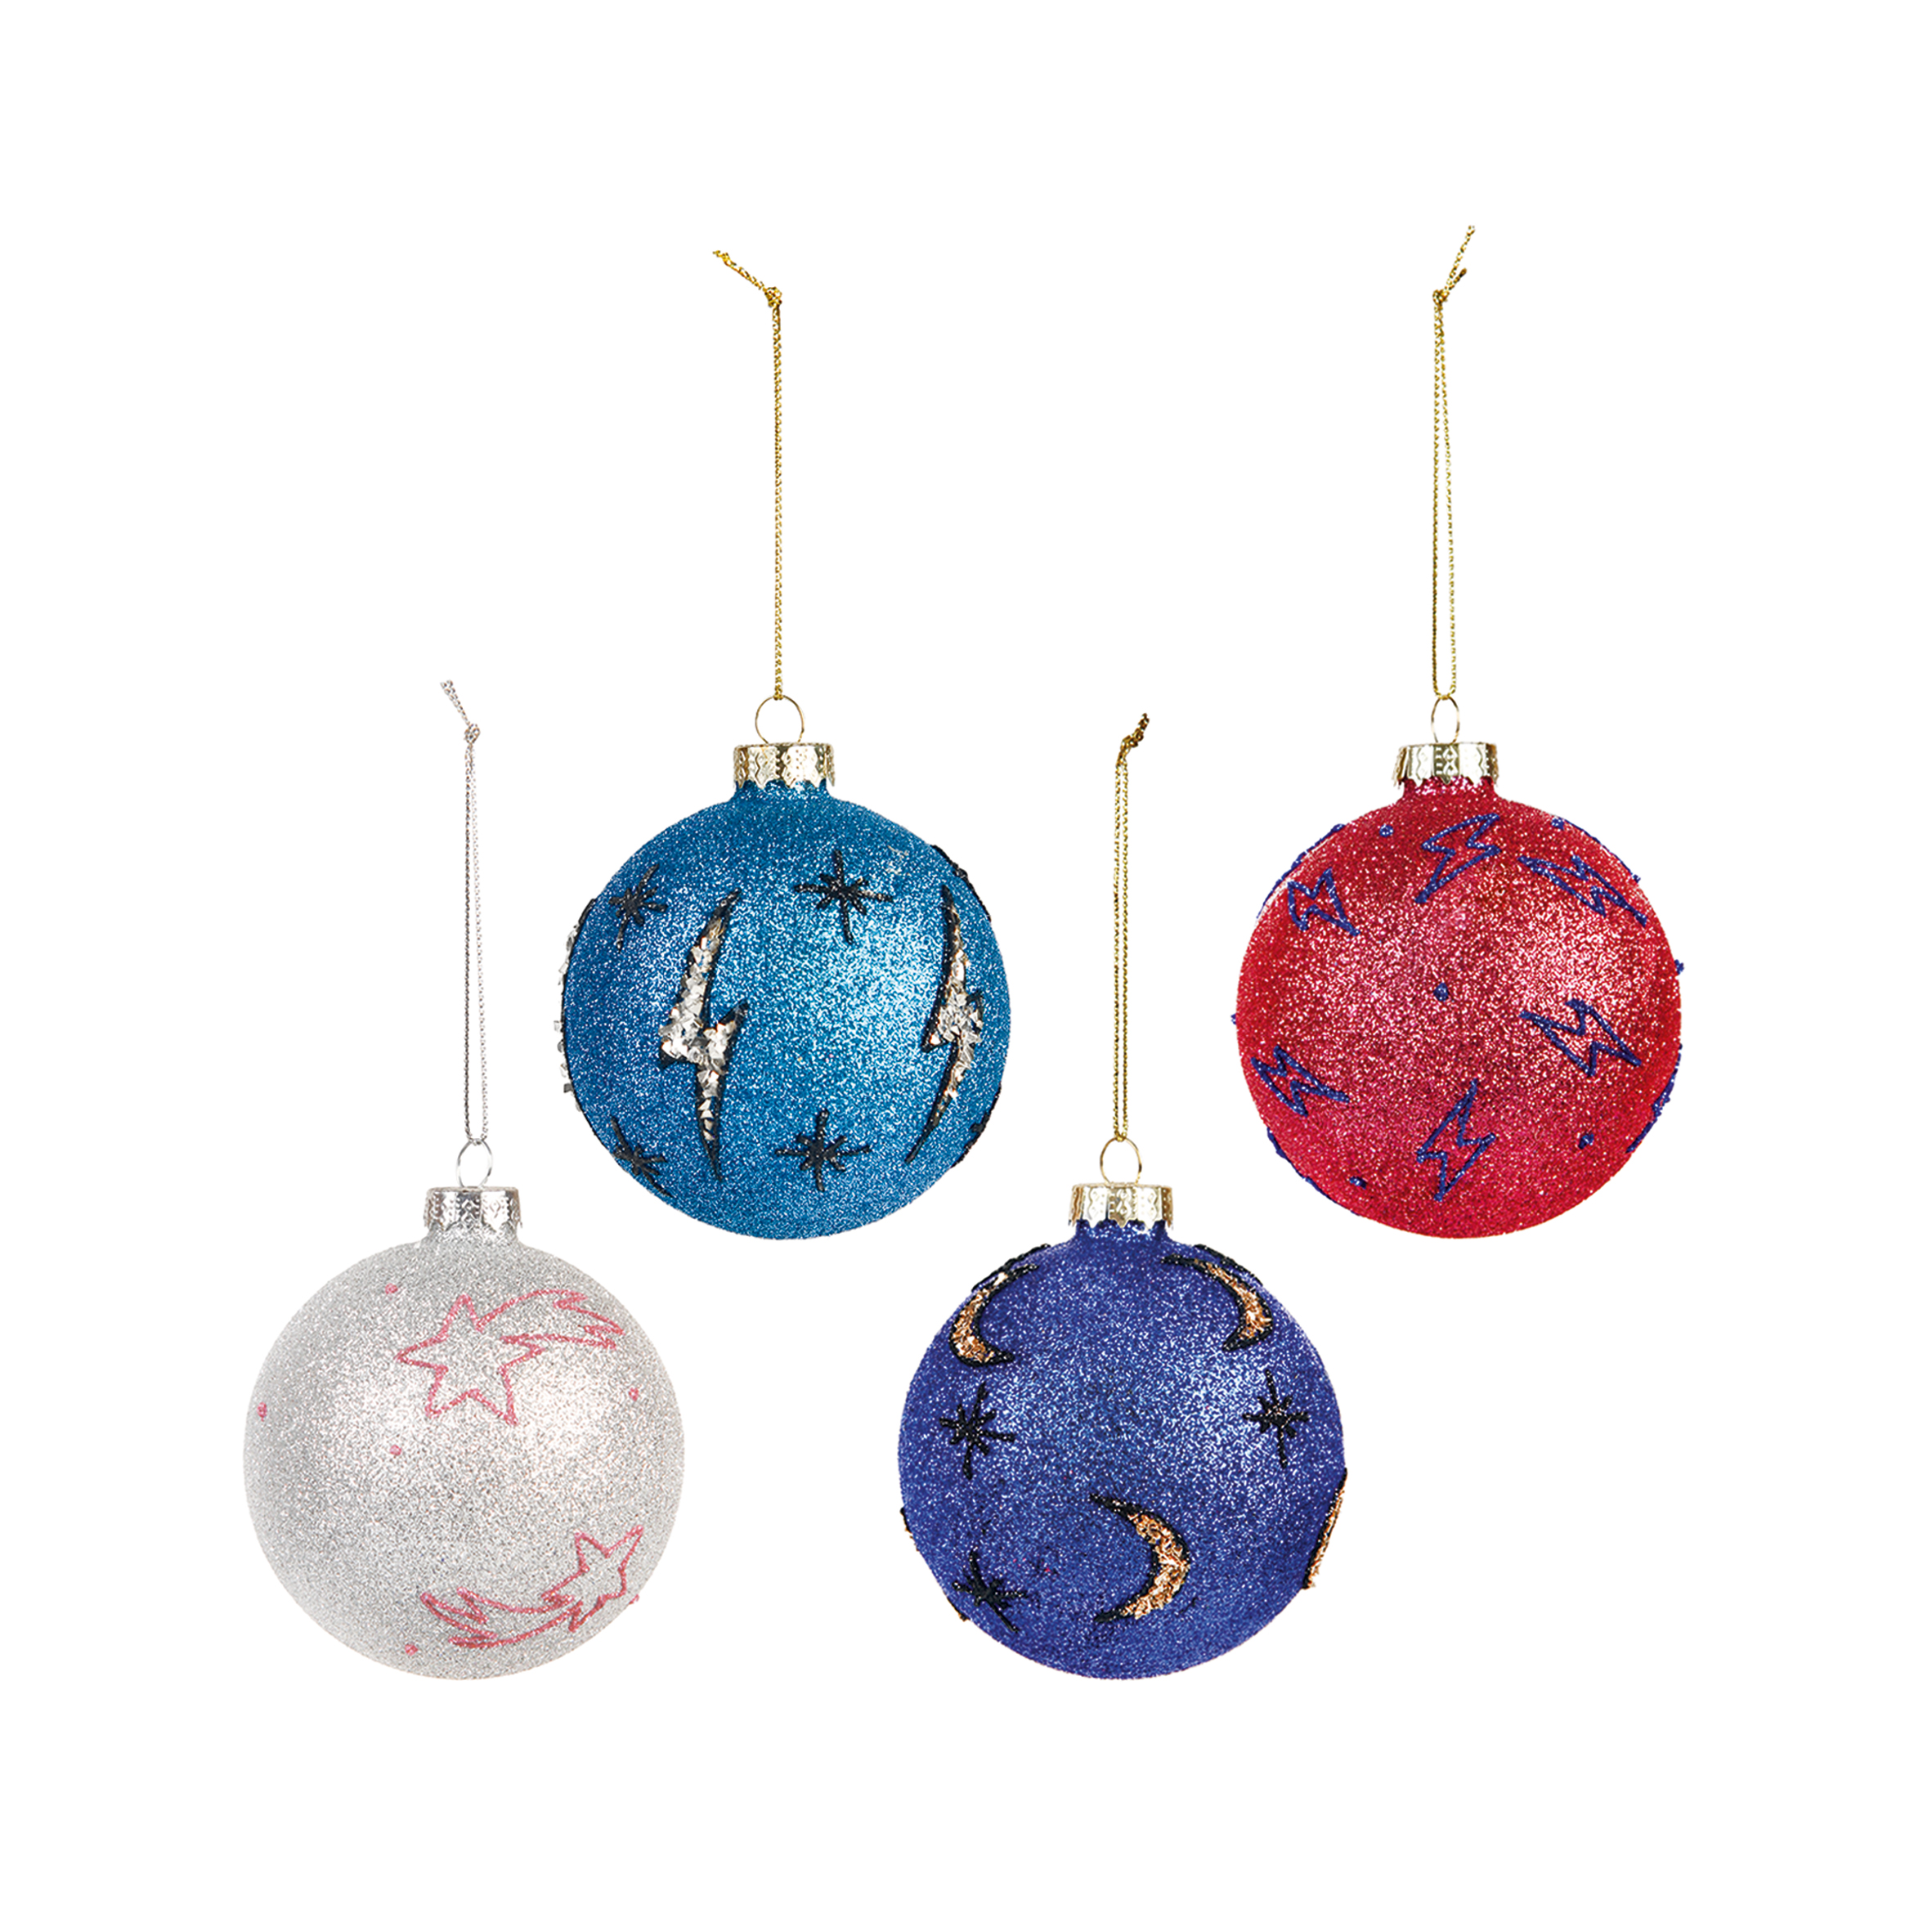 &klevering Set of 4 Hanging Christmas Cosmic Bubble Ornaments